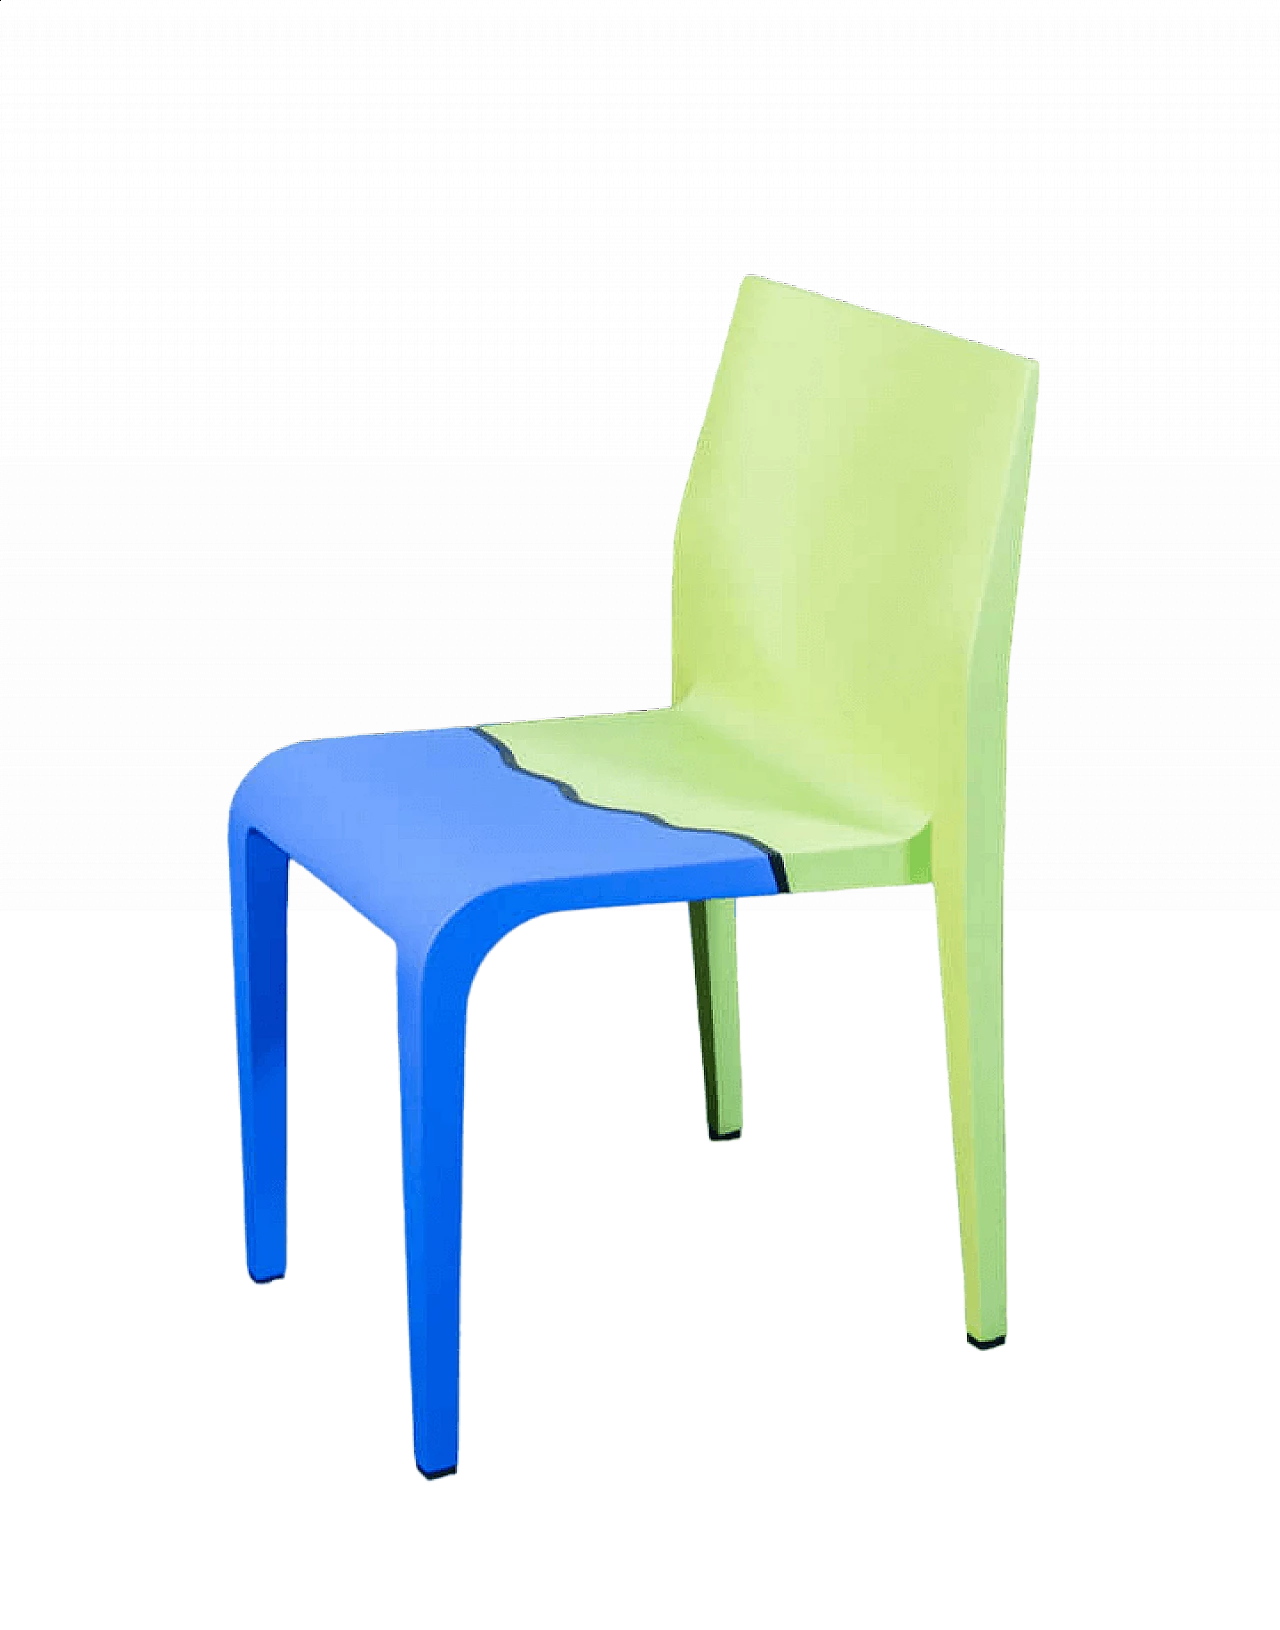 Laleggera 44 chair by Riccardo Blumer for Alias painted by Michelangelo Pistoletto, 2009 11